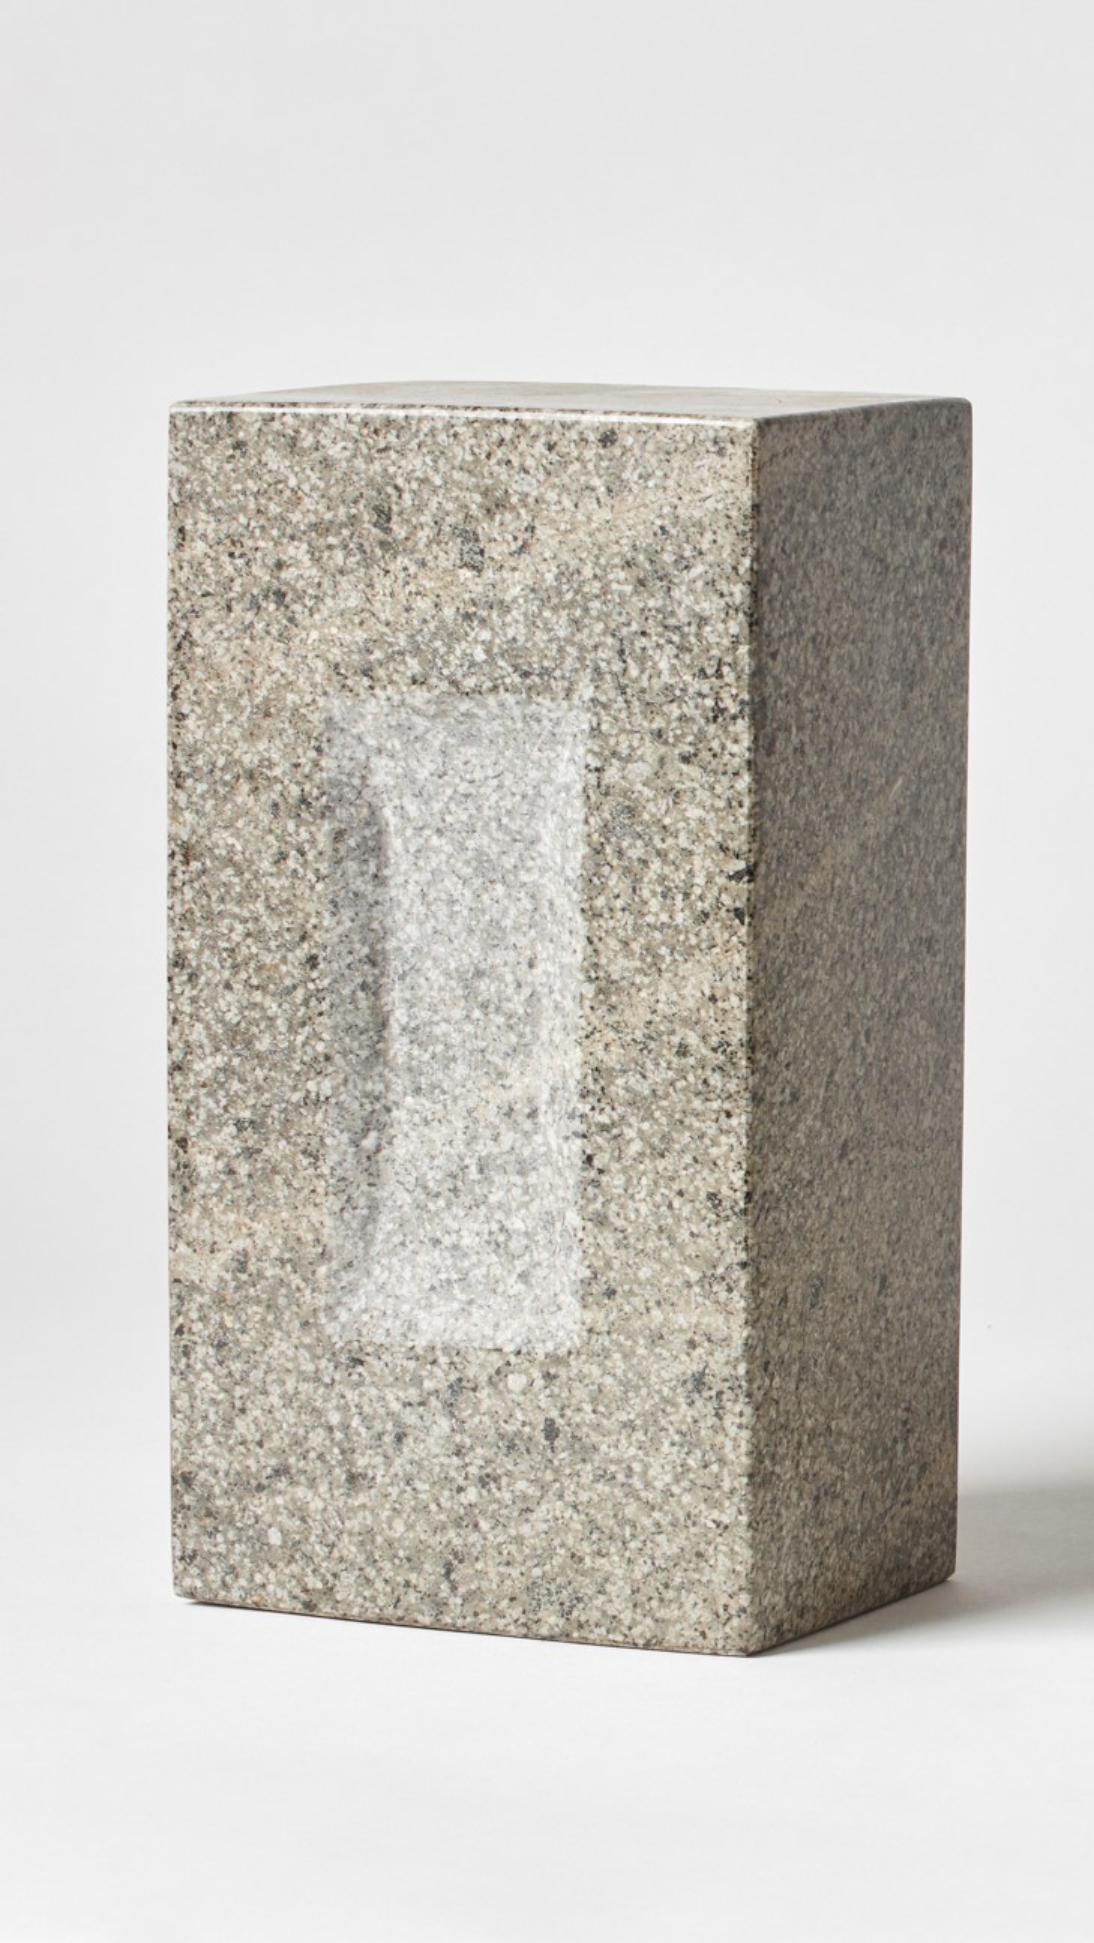 Brick by Estudio Rafael Freyre
Dimensions: W 12.5 D 9 x H 23 cm 
Materials: Andes Stones
Also available: Other finishes available.

The brick is a generic constructive element that constitutes part of the urban imaginary. In Peru, moreover, its